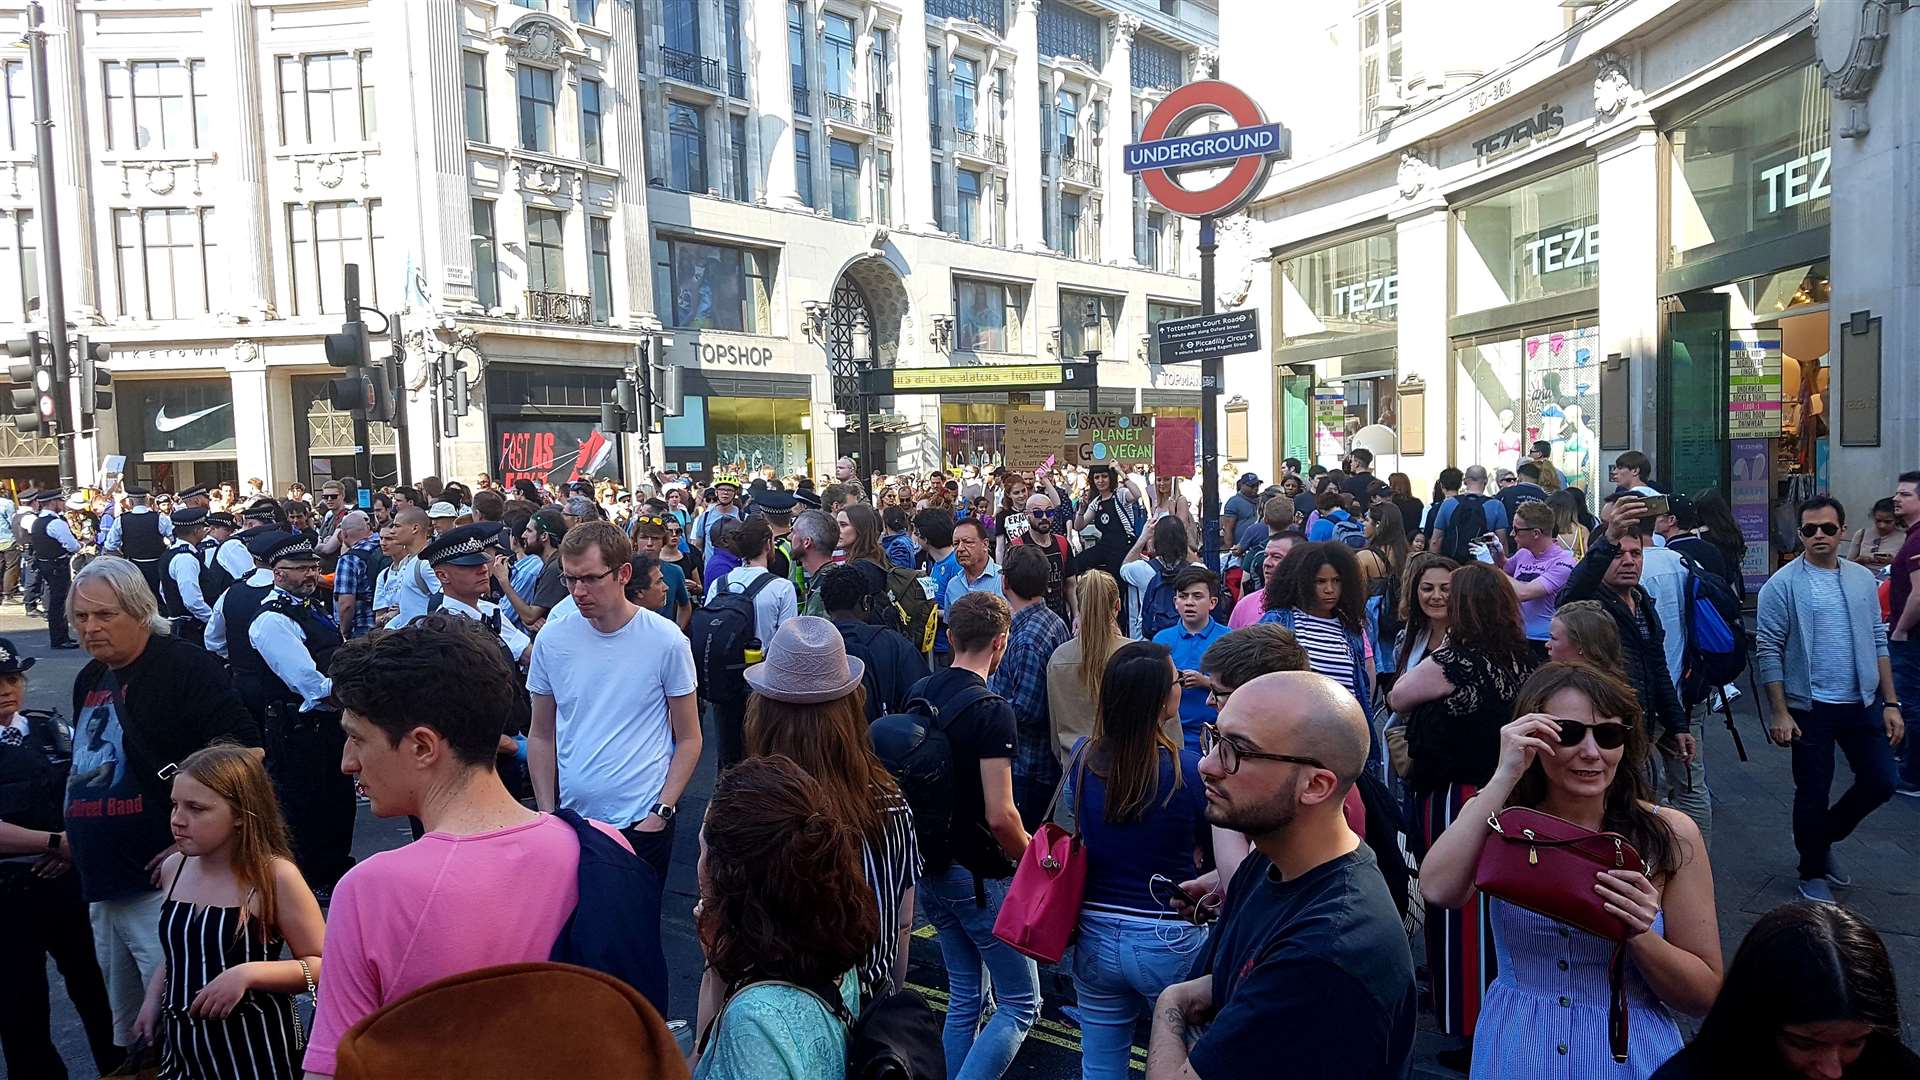 Climate change protesters fill Oxford Street in central London